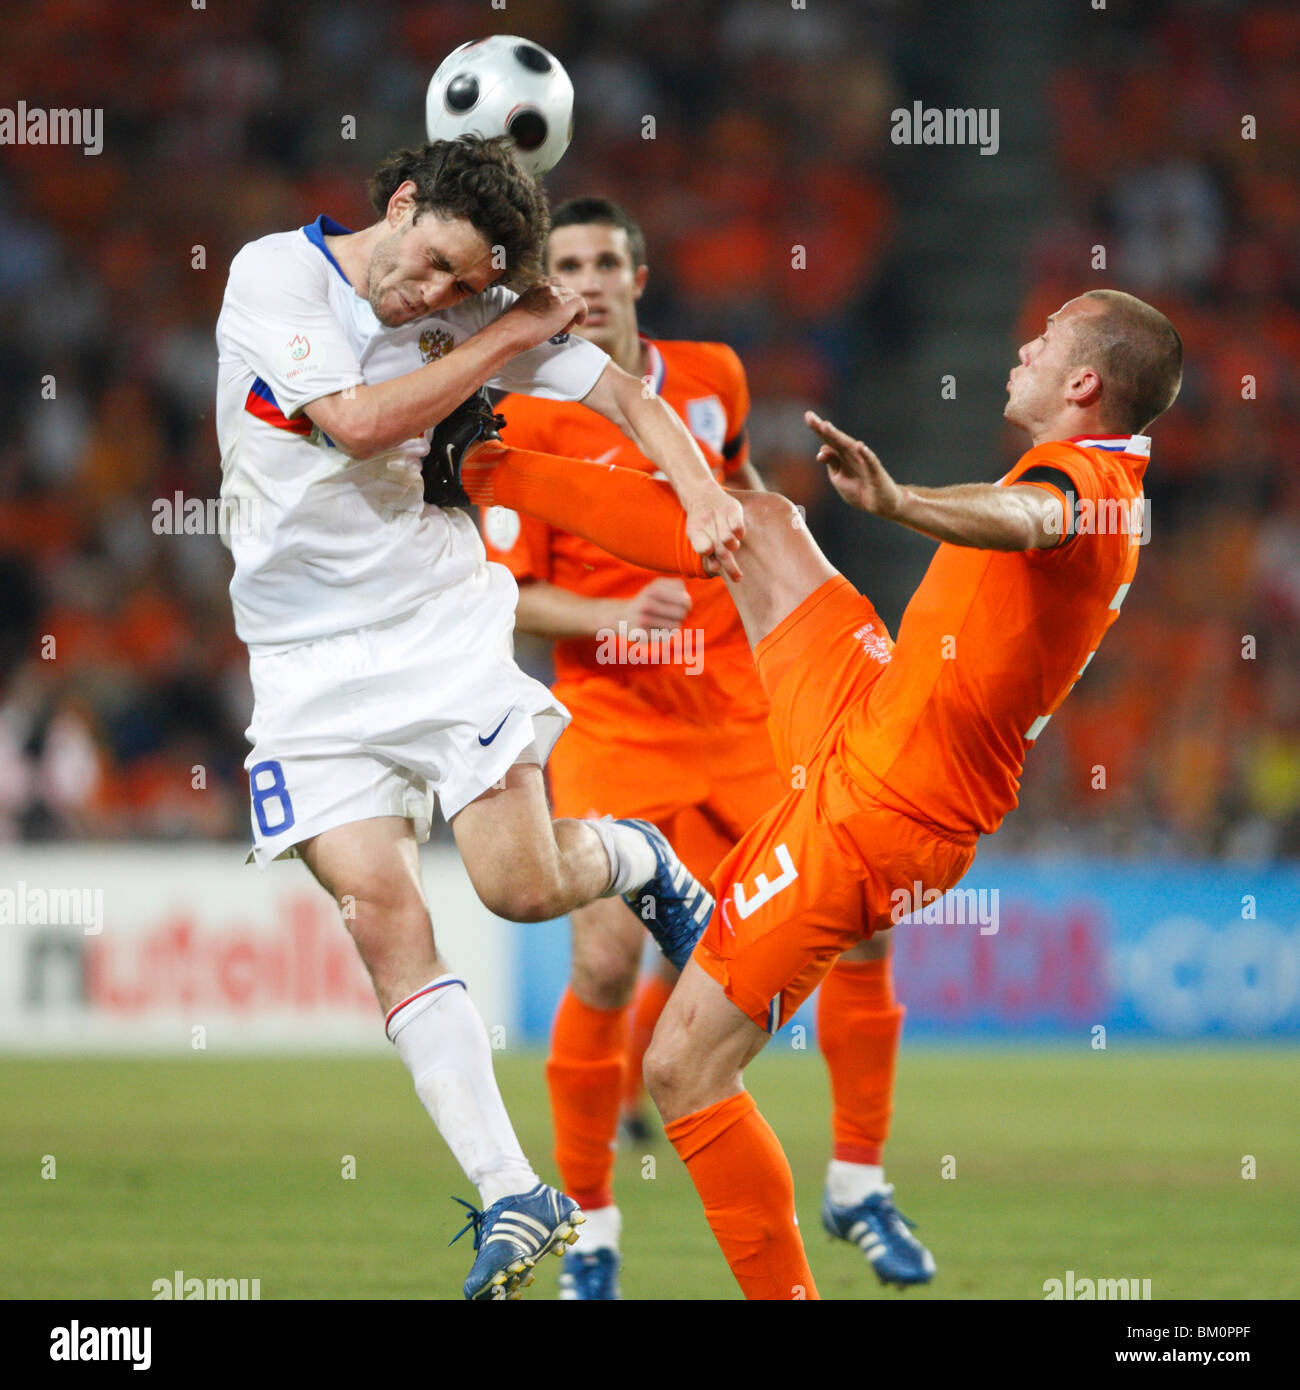 Denis Kolodin of Russia (8) and John Heitinga of the Netherlands (3) via for the ball during a UEFA Euro 2008 match June 21 2008 Stock Photo